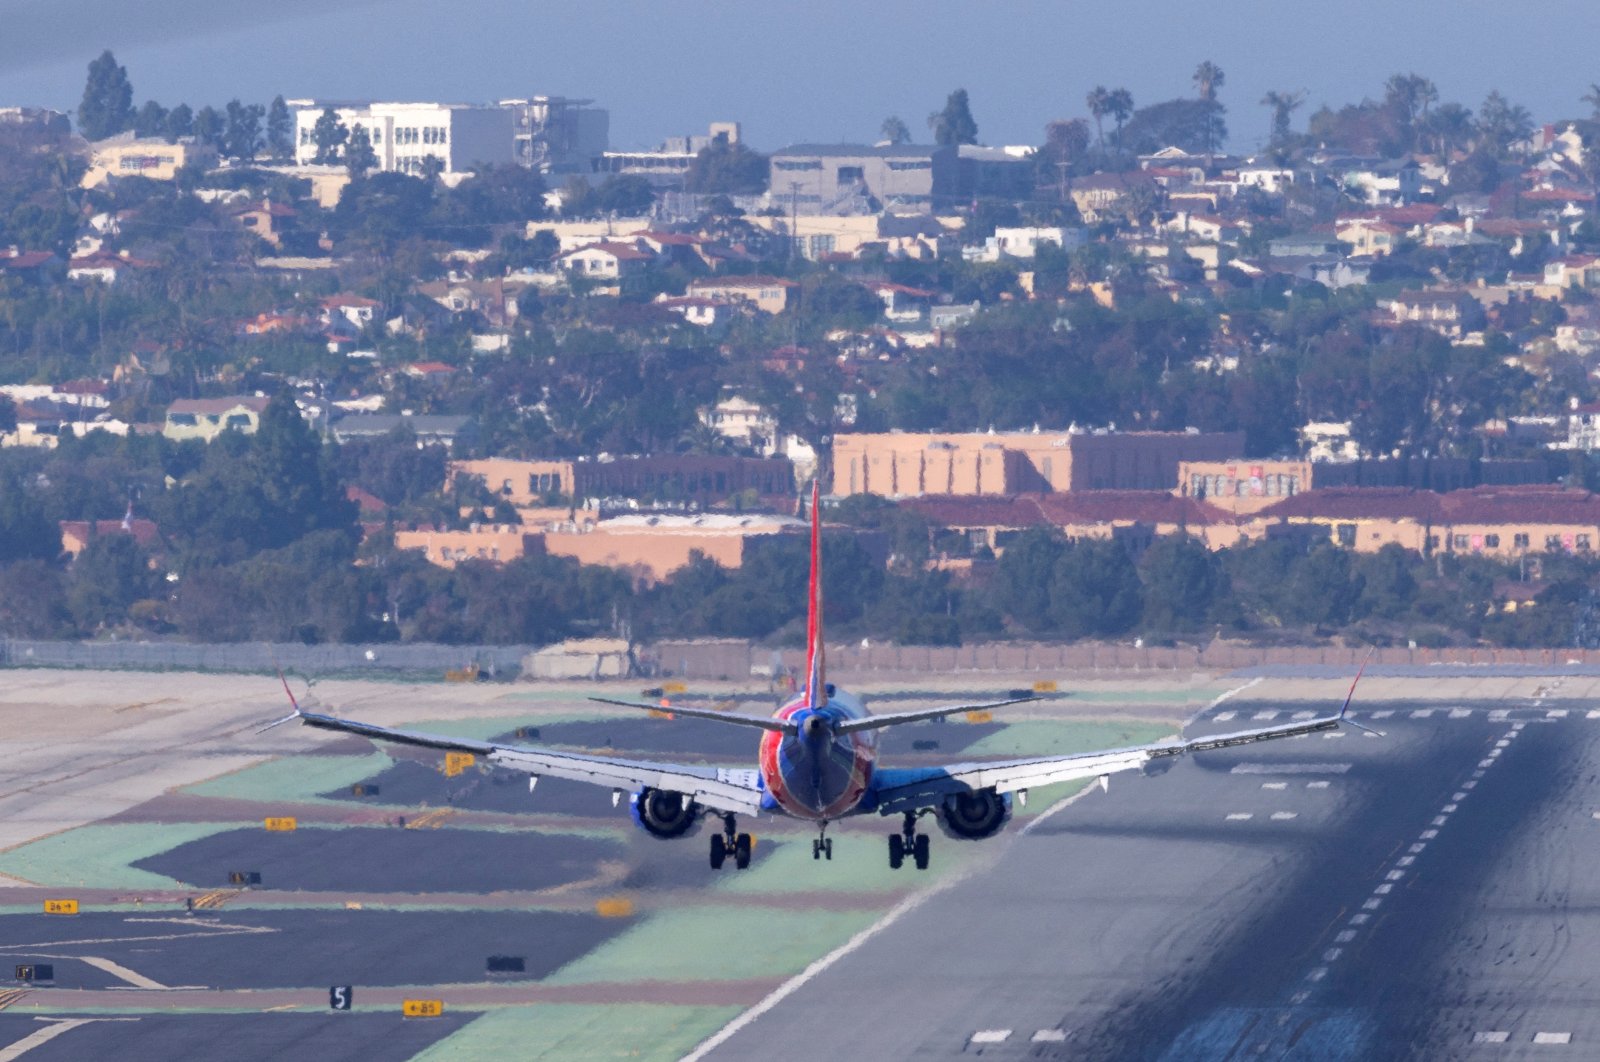 A Southwest Airlines plane approaches to land at San Diego International Airport in San Diego, California, U.S., Jan. 6, 2022. (Reuters Photo)